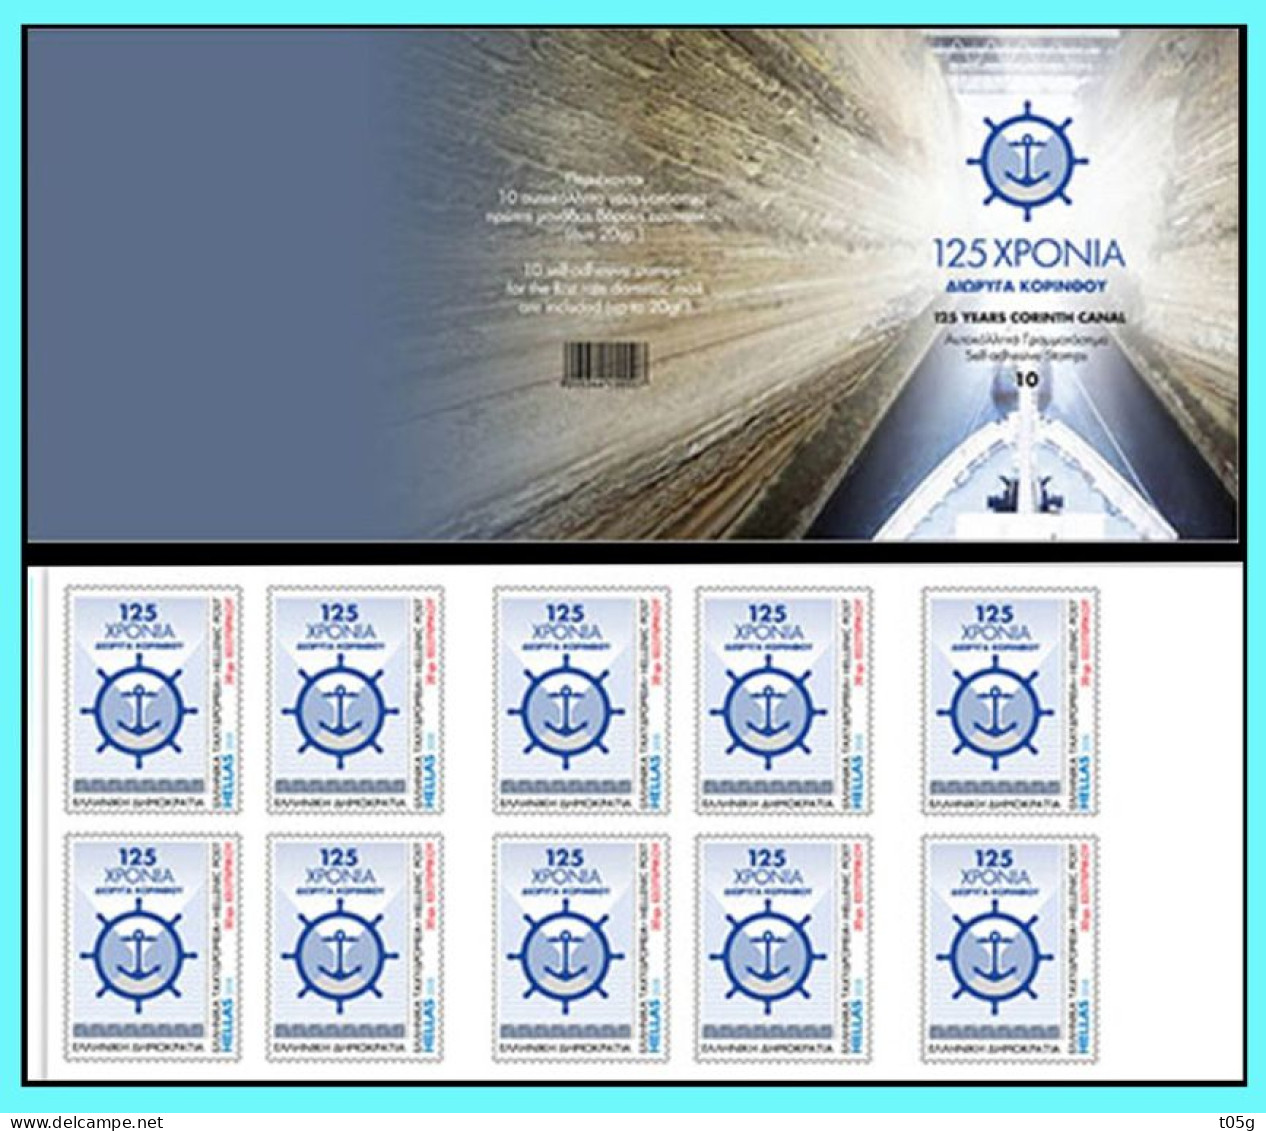 GREECE- GRECE  - HELLAS 2018: 125 YEARS OF THE KORINTH CANAL​ Self-athesive Stamp Compl. Booklet  MNH** - Unused Stamps